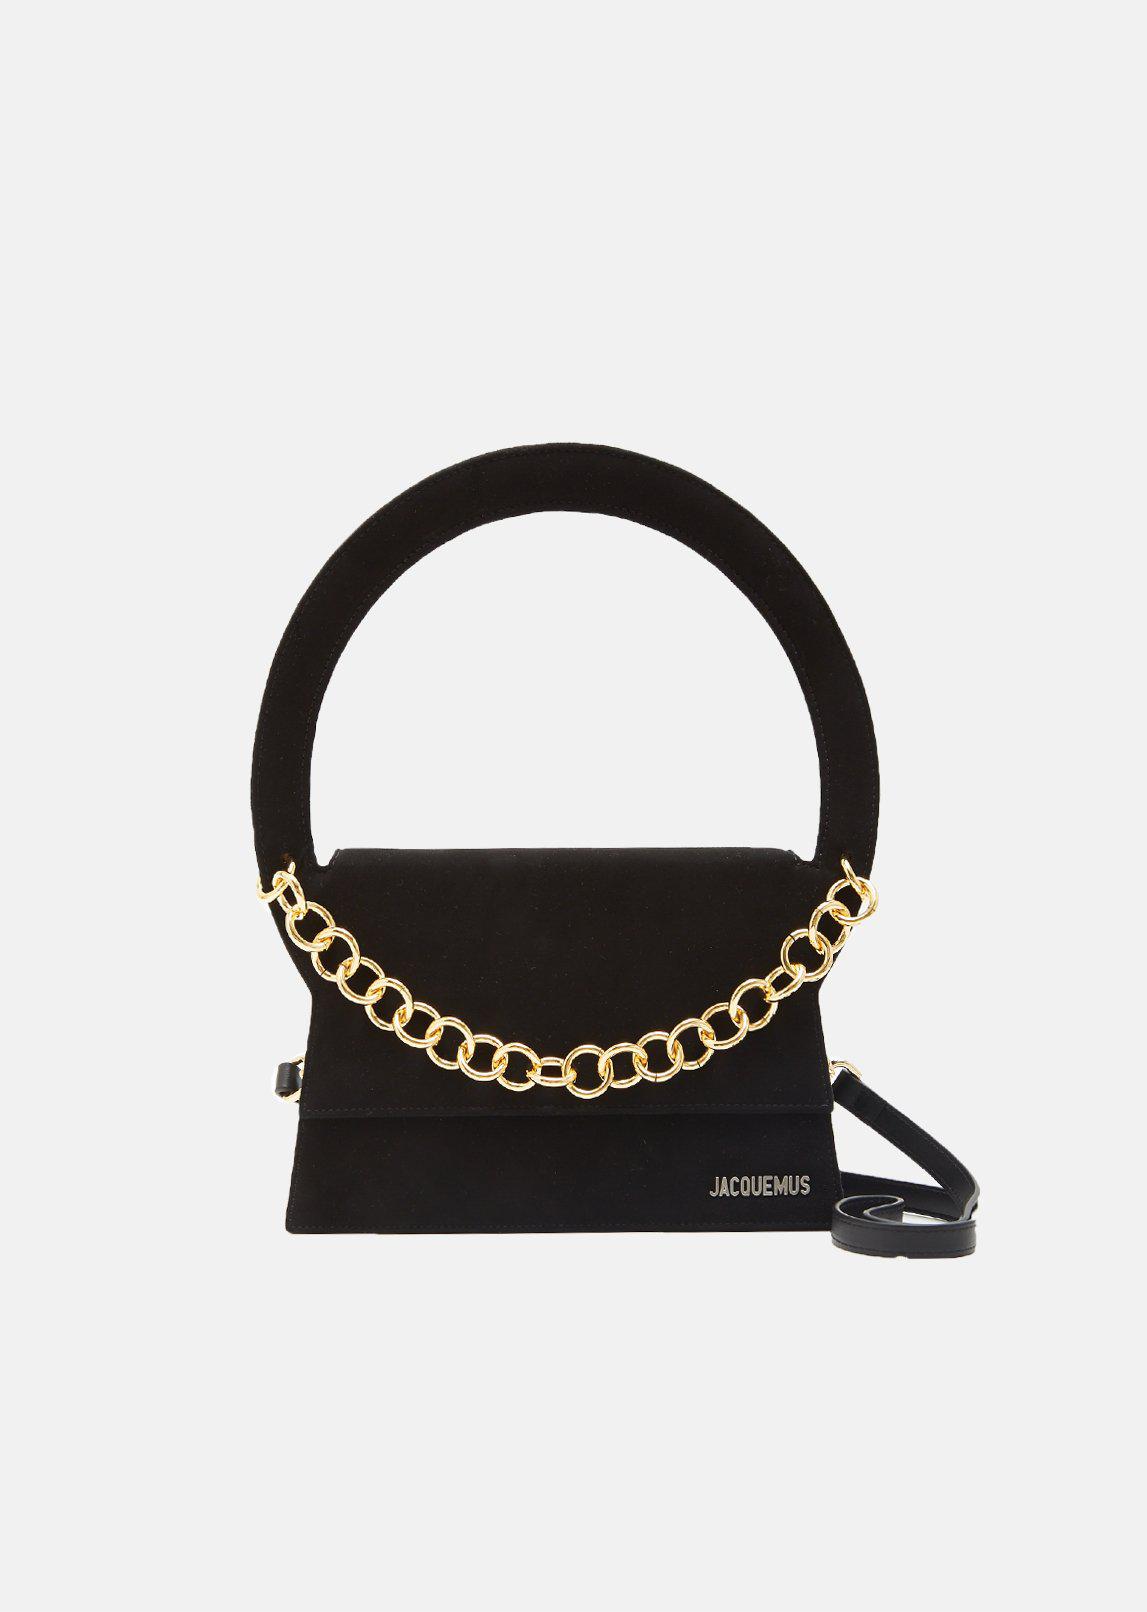 Jacquemus Le Sac Rond Suede Bag in Black - Lyst